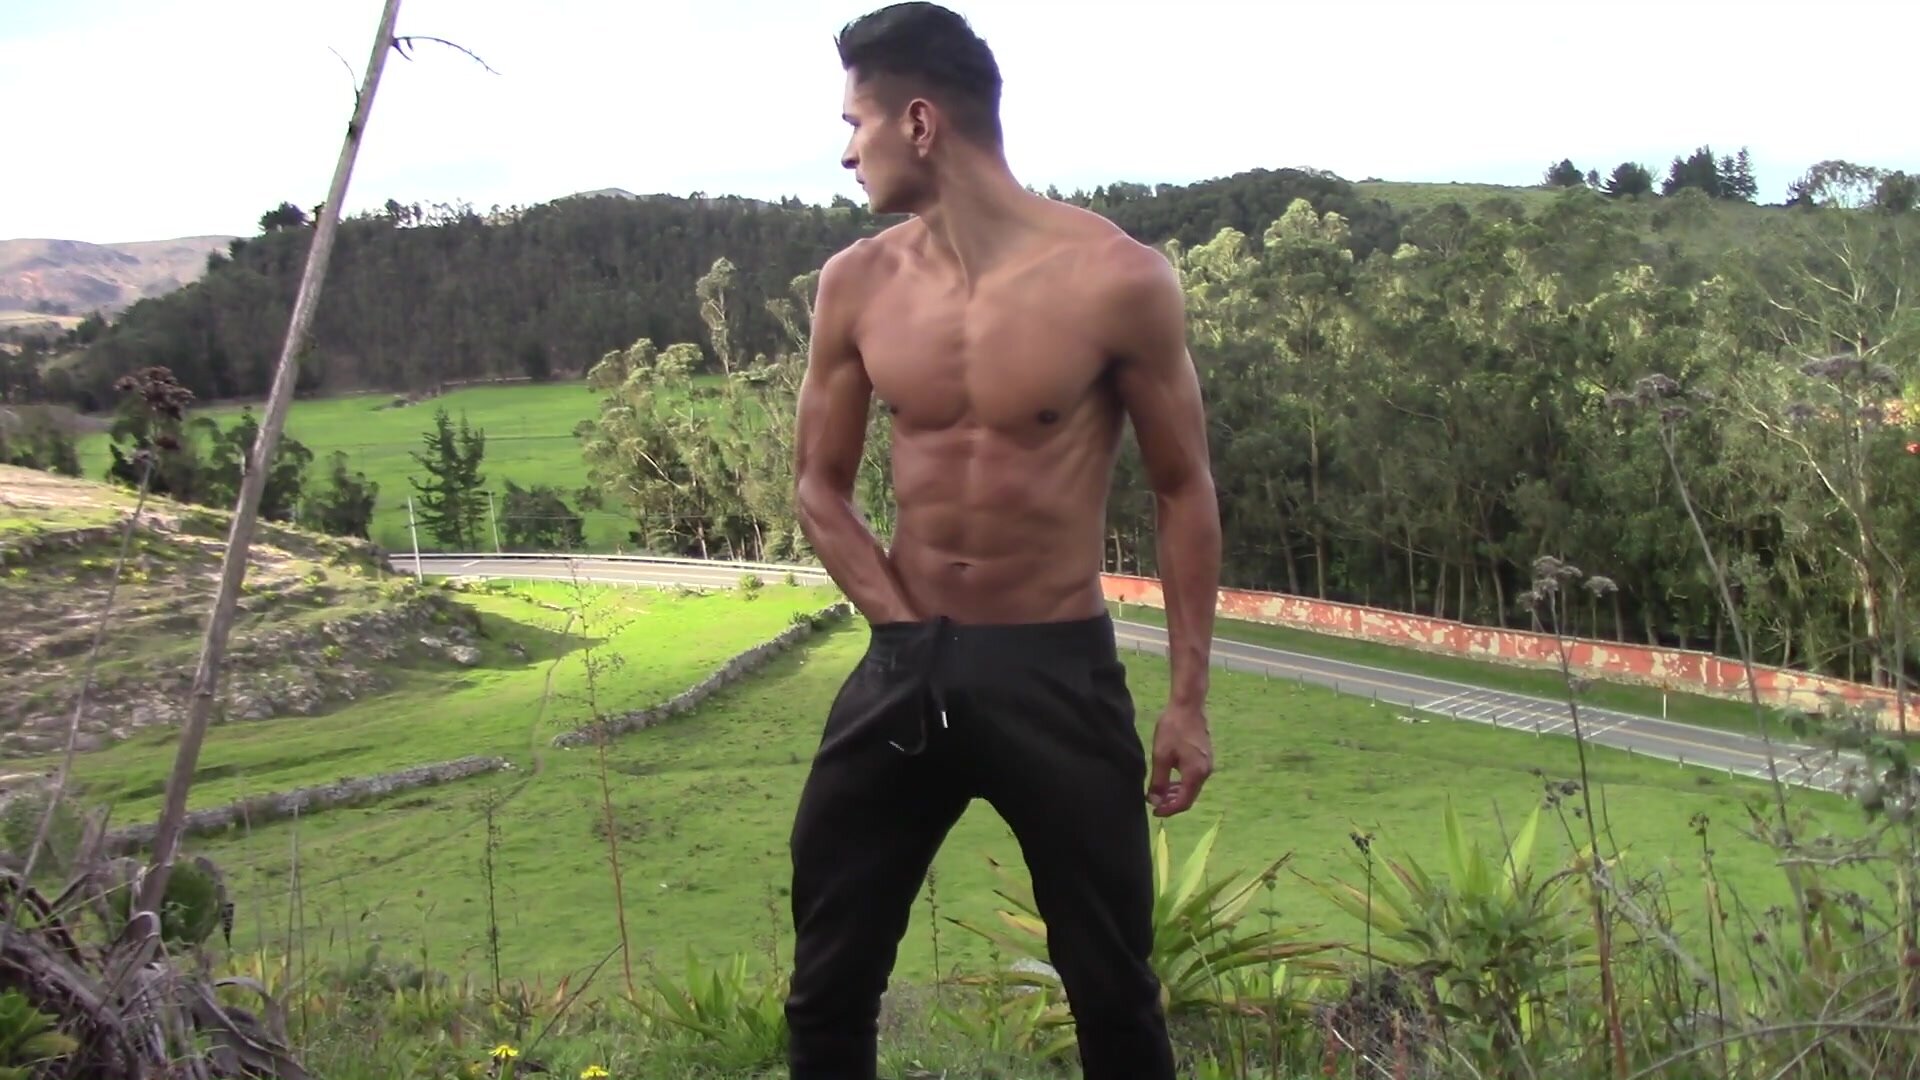 COLOMBIAN DUDE STROKING HIS DICK OUTDOORS